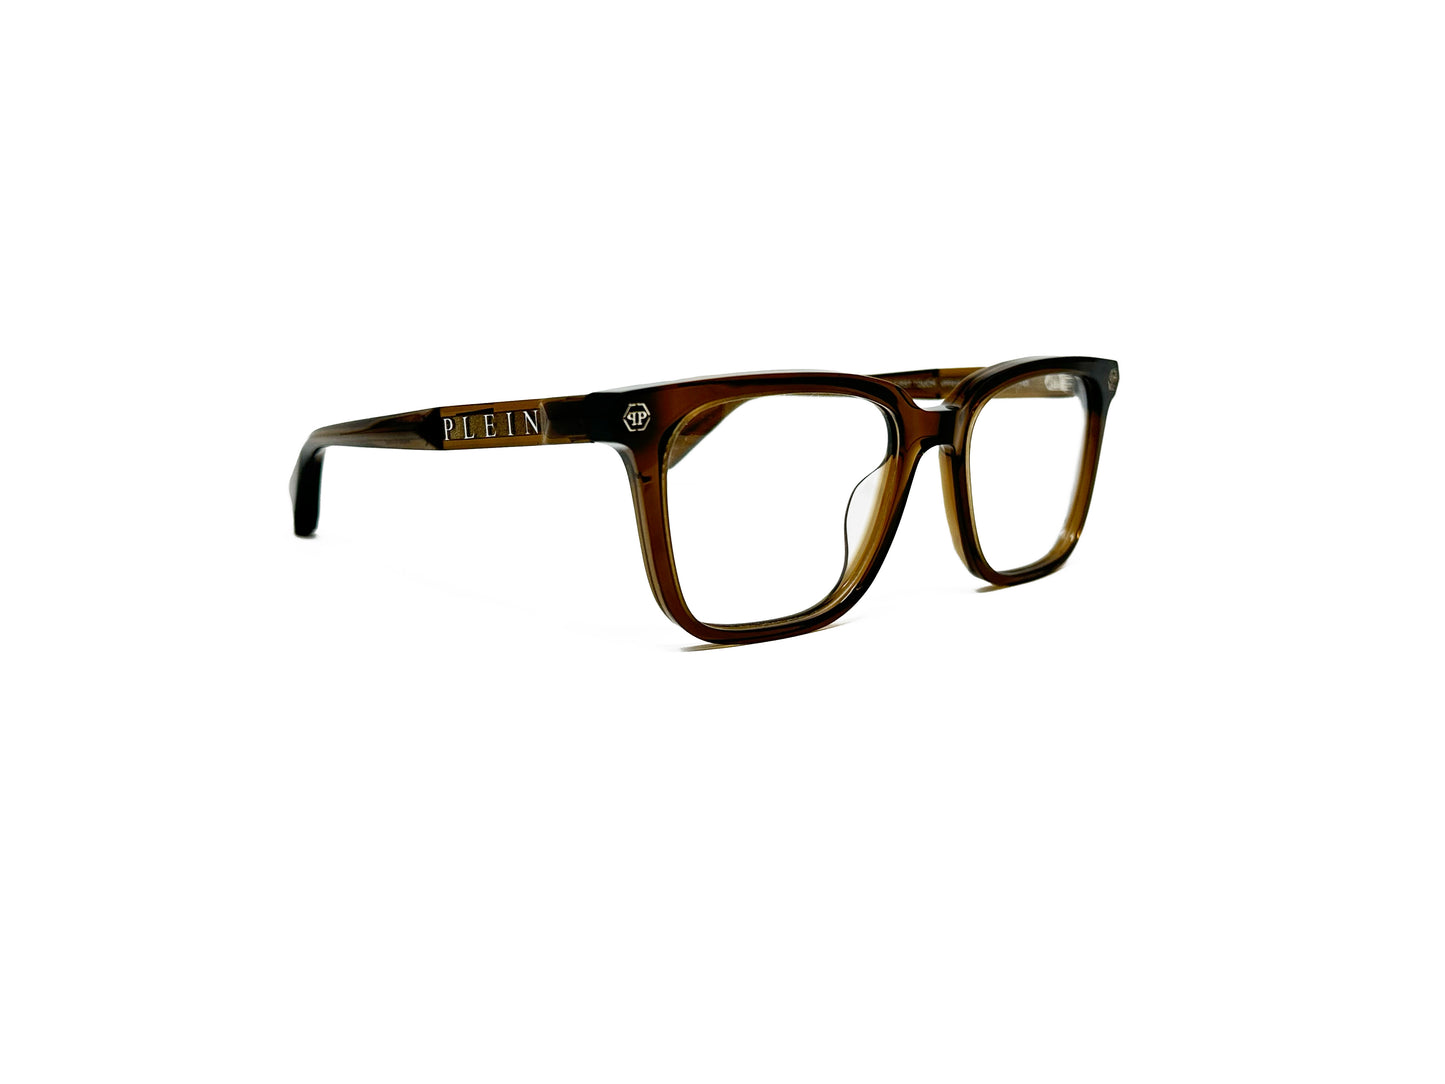 Philipp Plein square acetate optical frame. Model: VPP015 First Touch. Color: 03GE Semi-transparent brown. Side view.